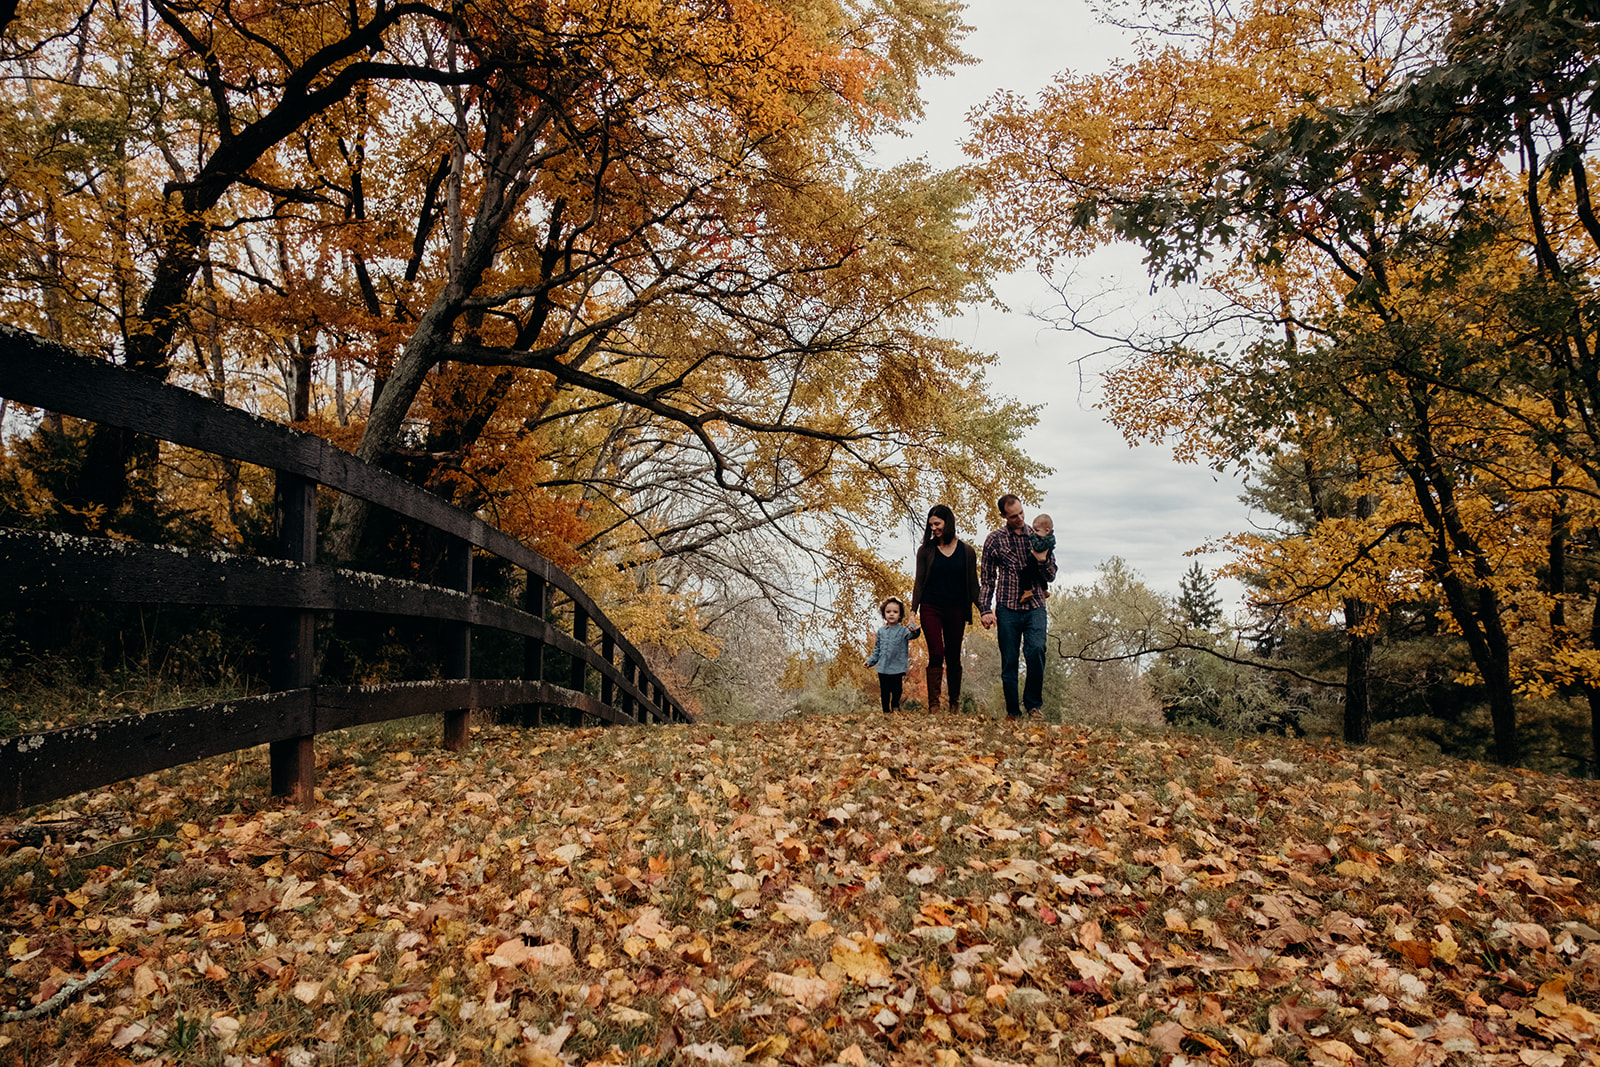 A family walks through colorful autumn leaves at Morven Park.